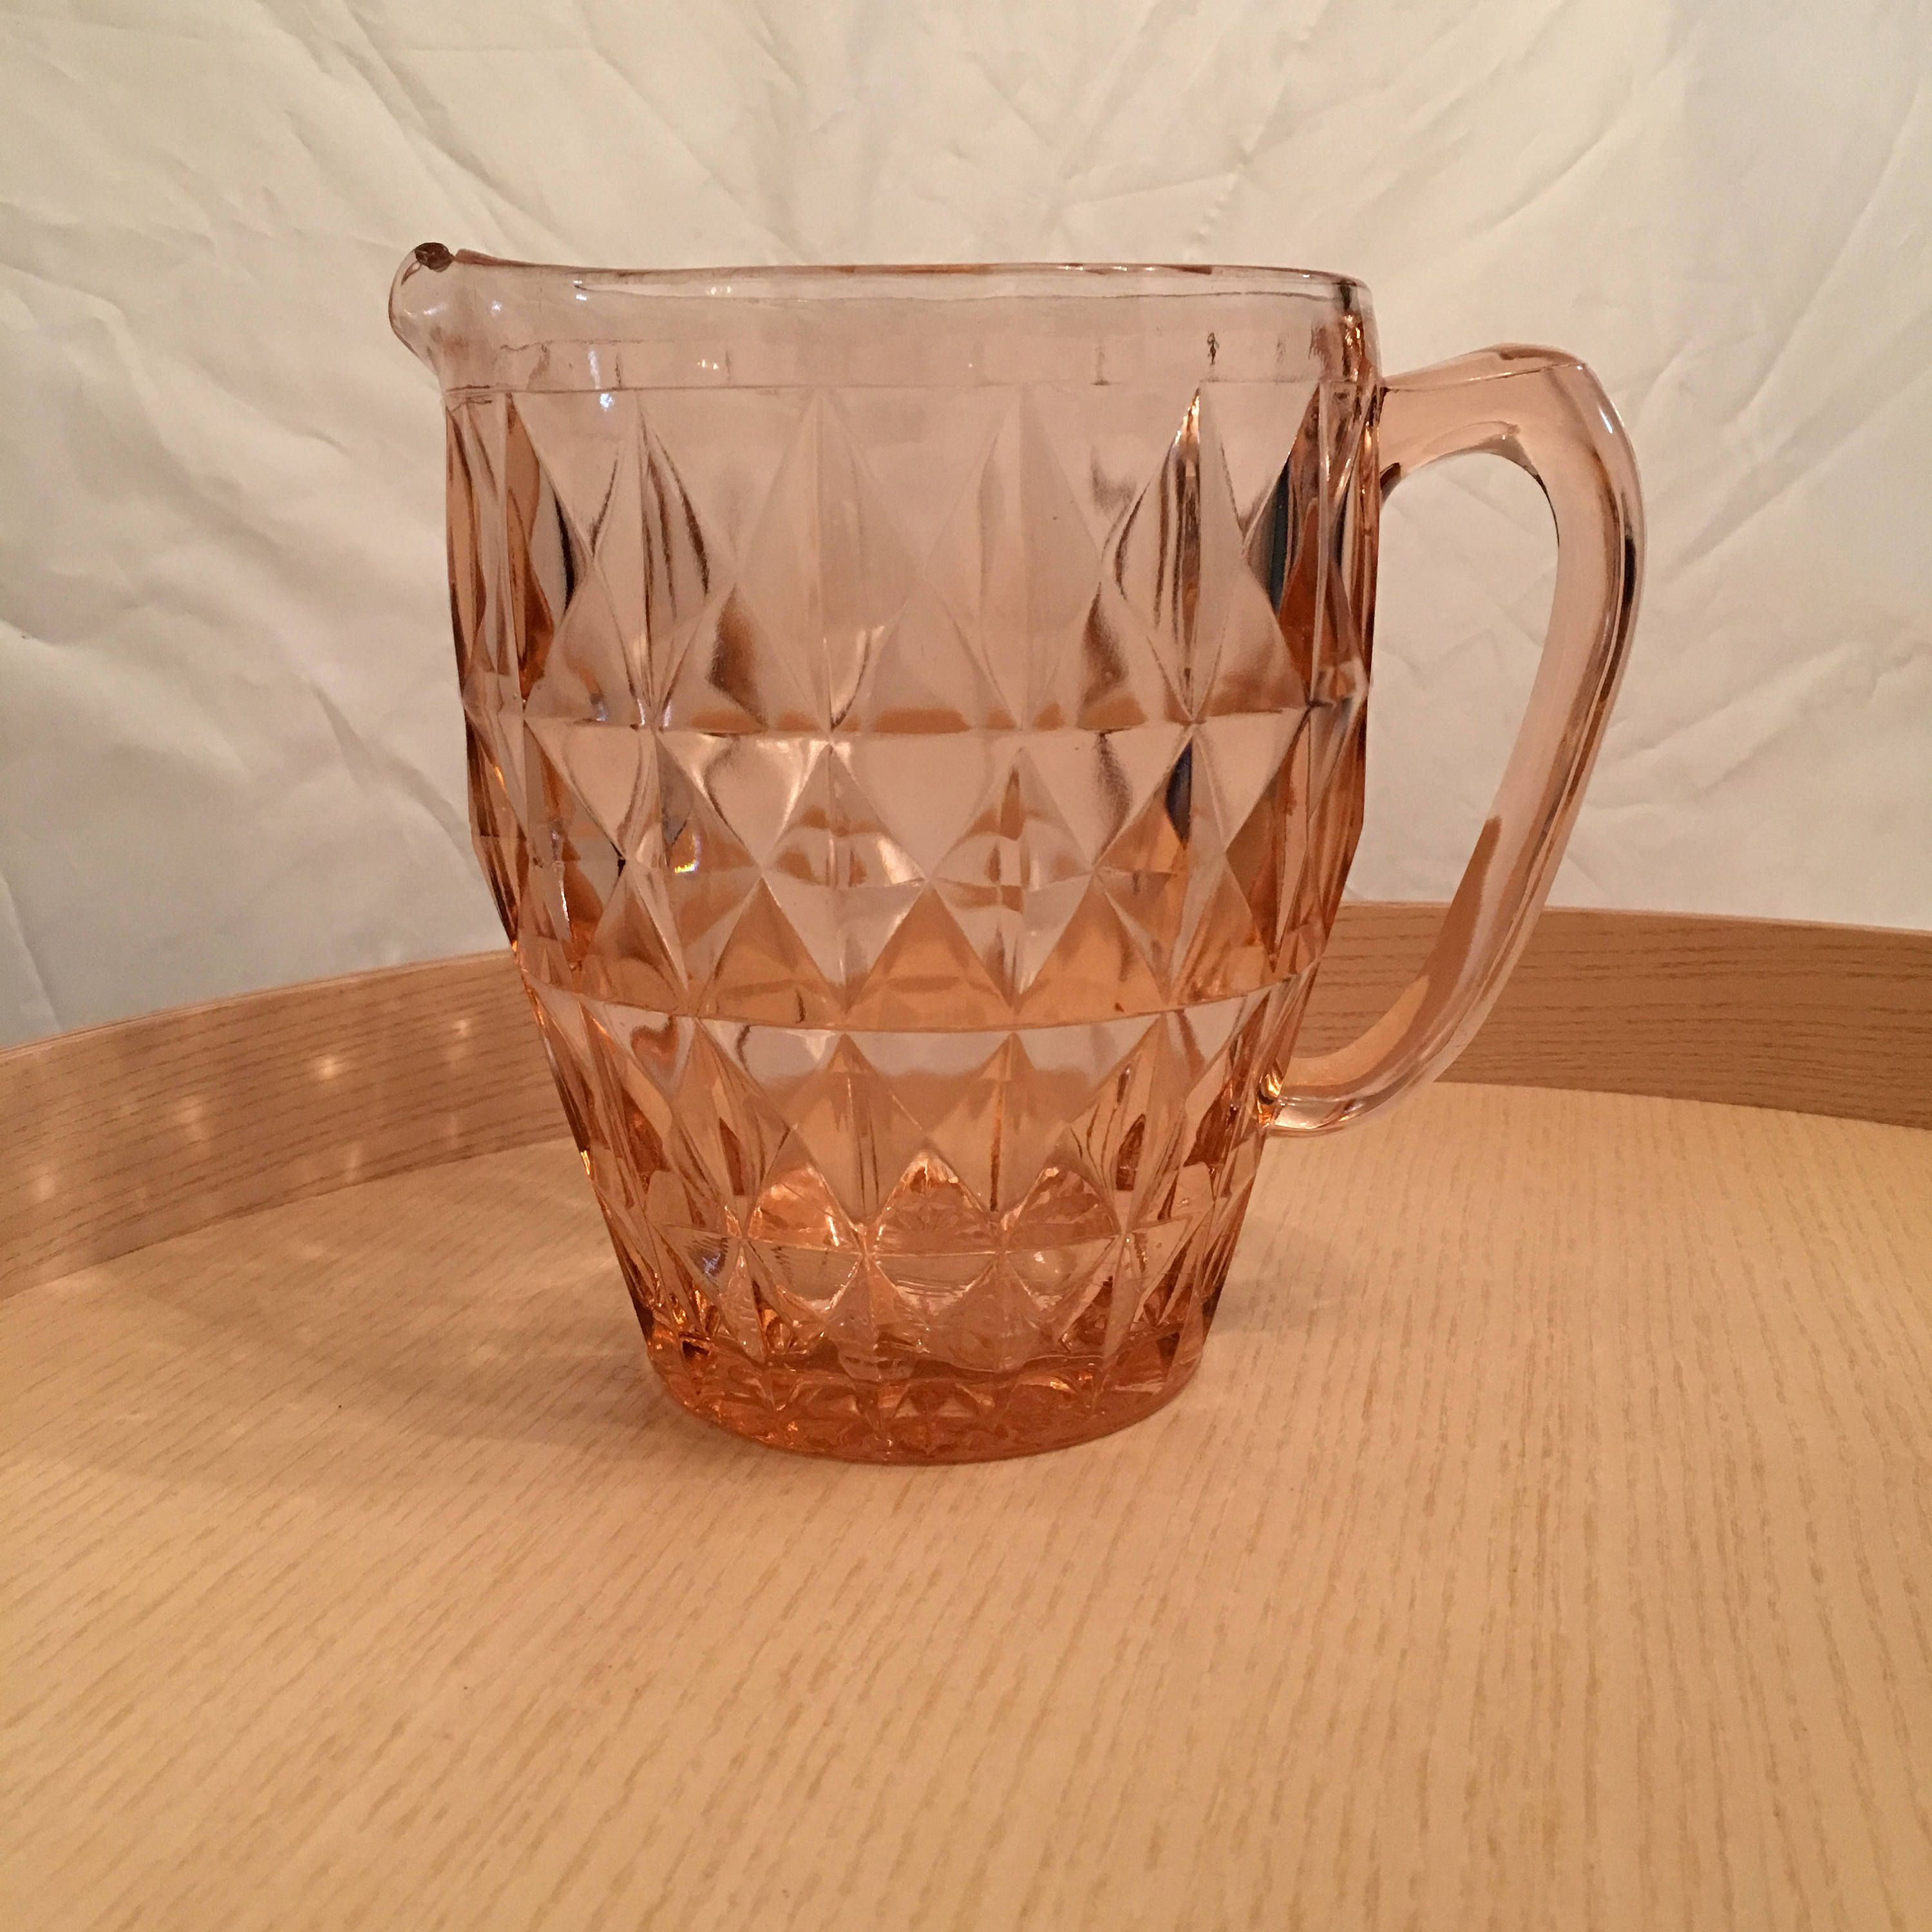 10 Great 4 Square Glass Vase 2024 free download 4 square glass vase of depression glass jeannette windsor diamond pitcher vase large pink pertaining to depression glass jeannette windsor diamond pitcher large pink glass pitcher vintage di